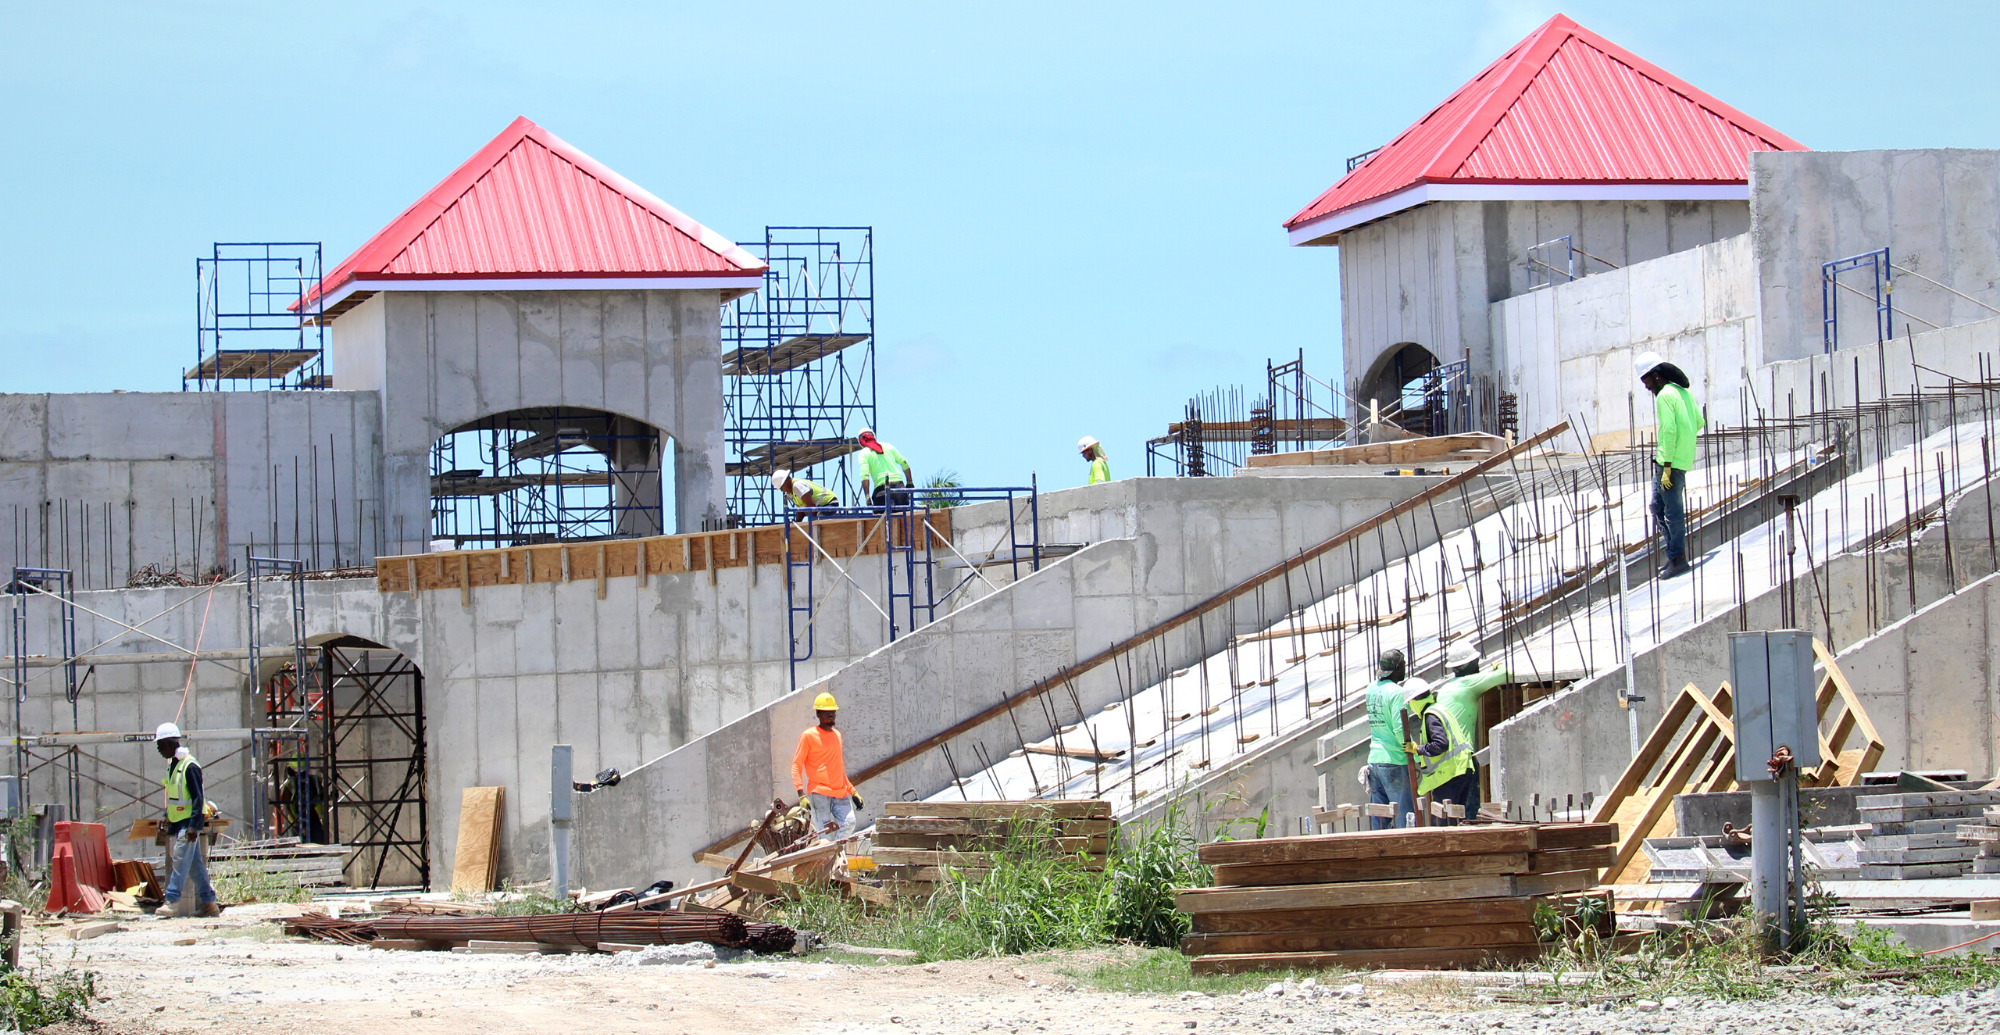 GEC is installing steel reinforcement and forms for bleacher stairs and risers at the Paul E. Joseph Stadium on St. Croix, Public Works said on Wednesday. (Photo courtesy Public Works Department)